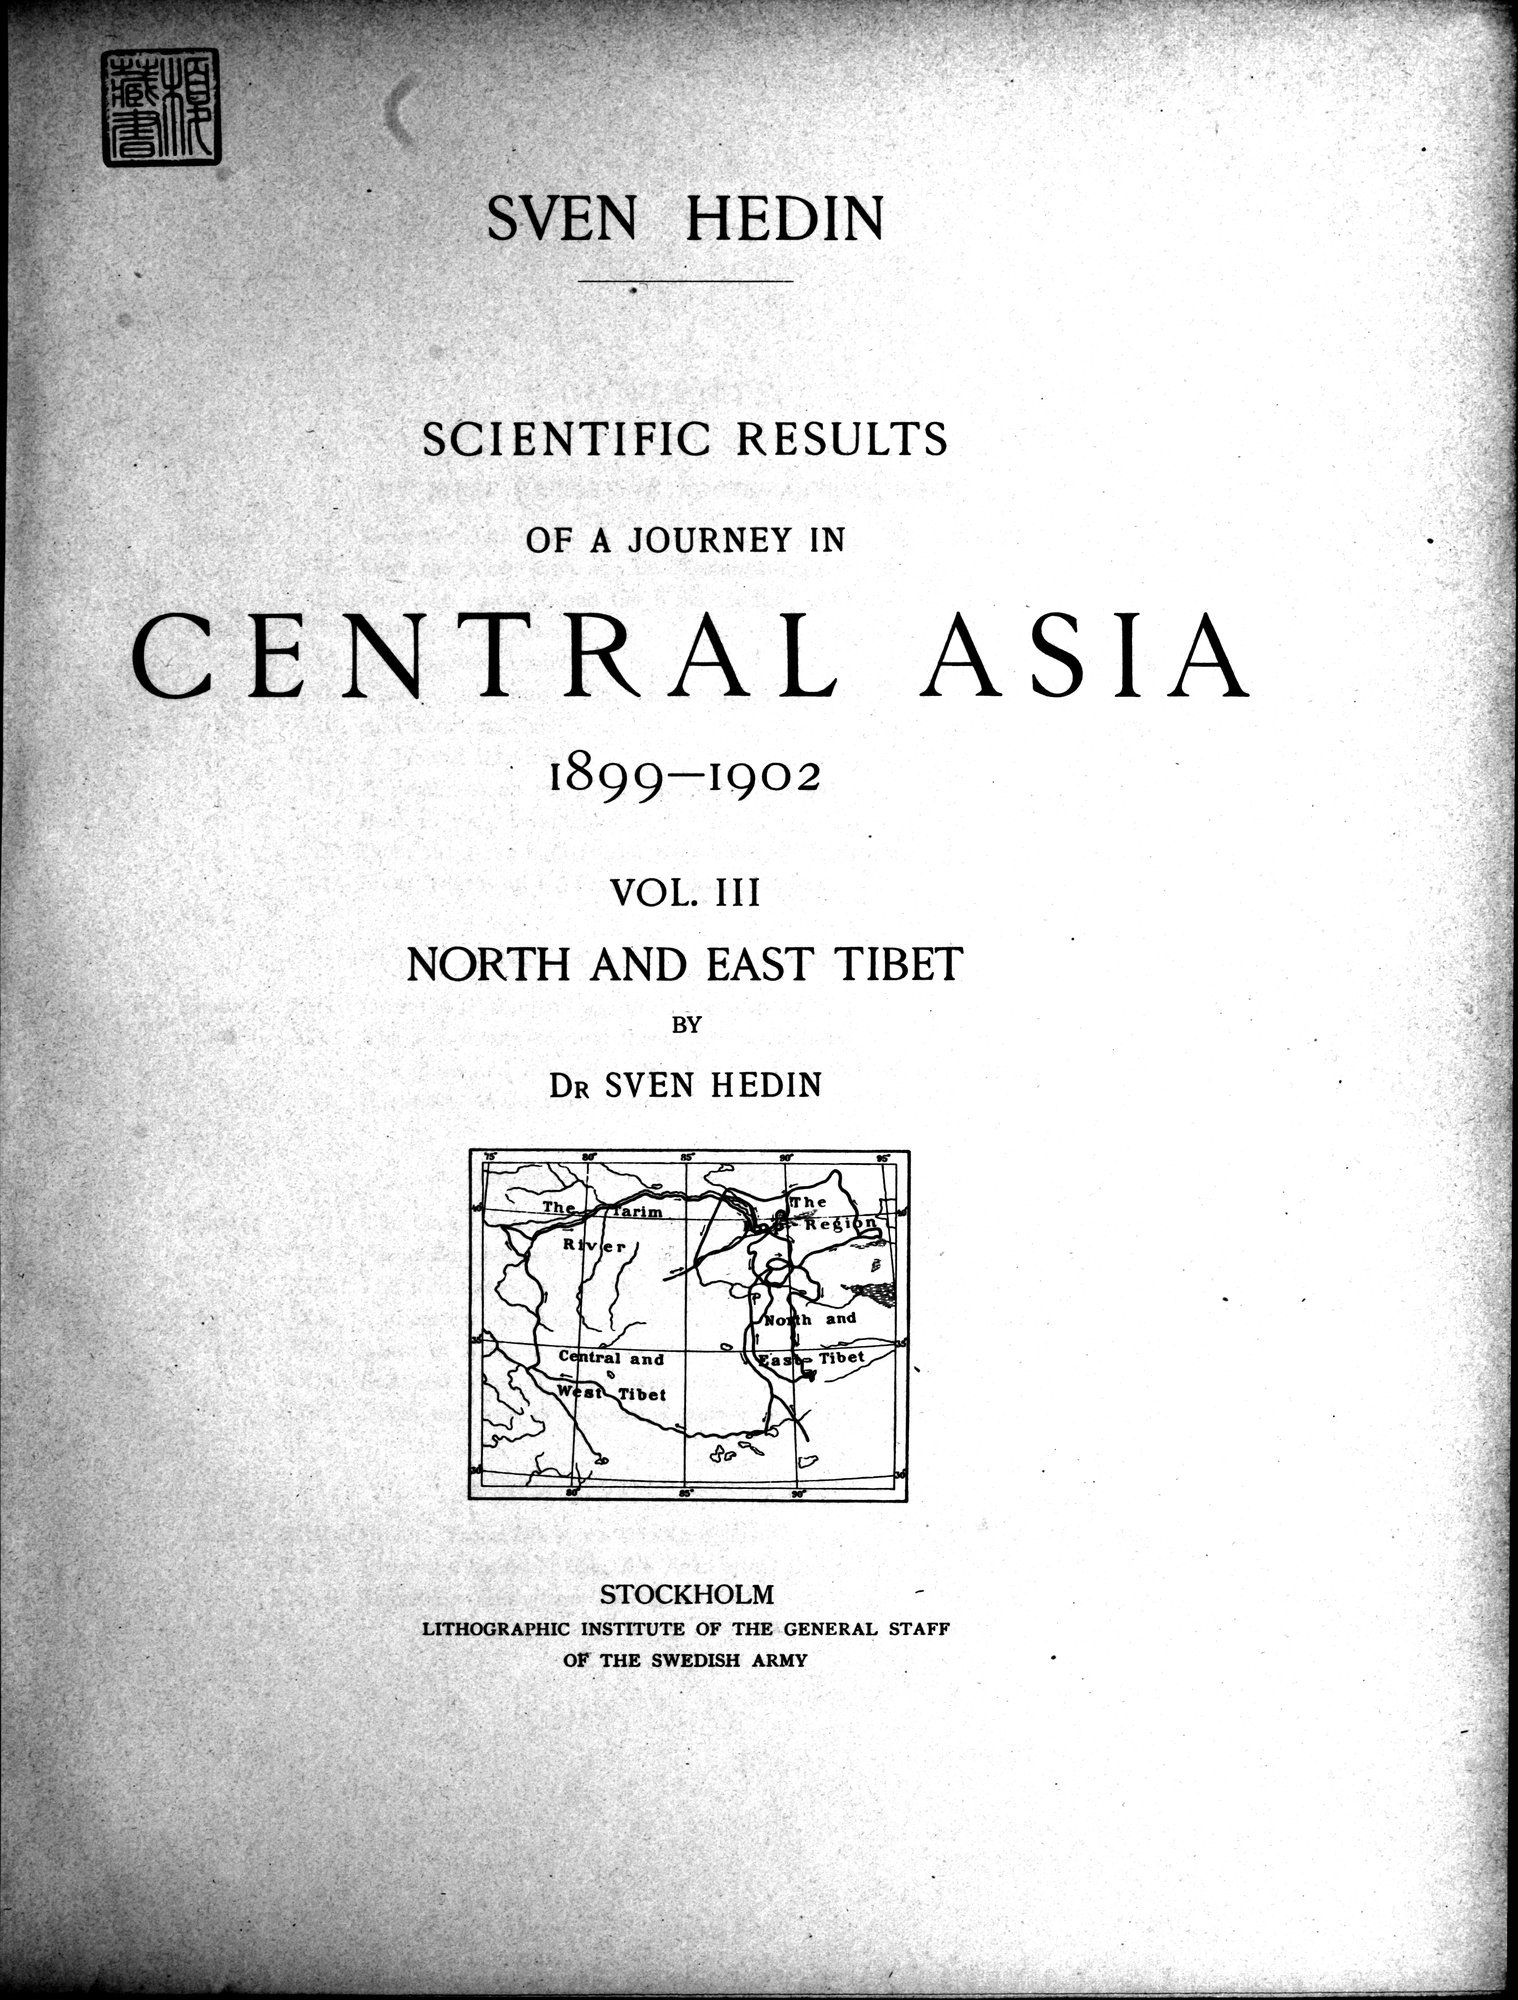 Scientific Results of a Journey in Central Asia, 1899-1902 : vol.3 / 9 ページ（白黒高解像度画像）